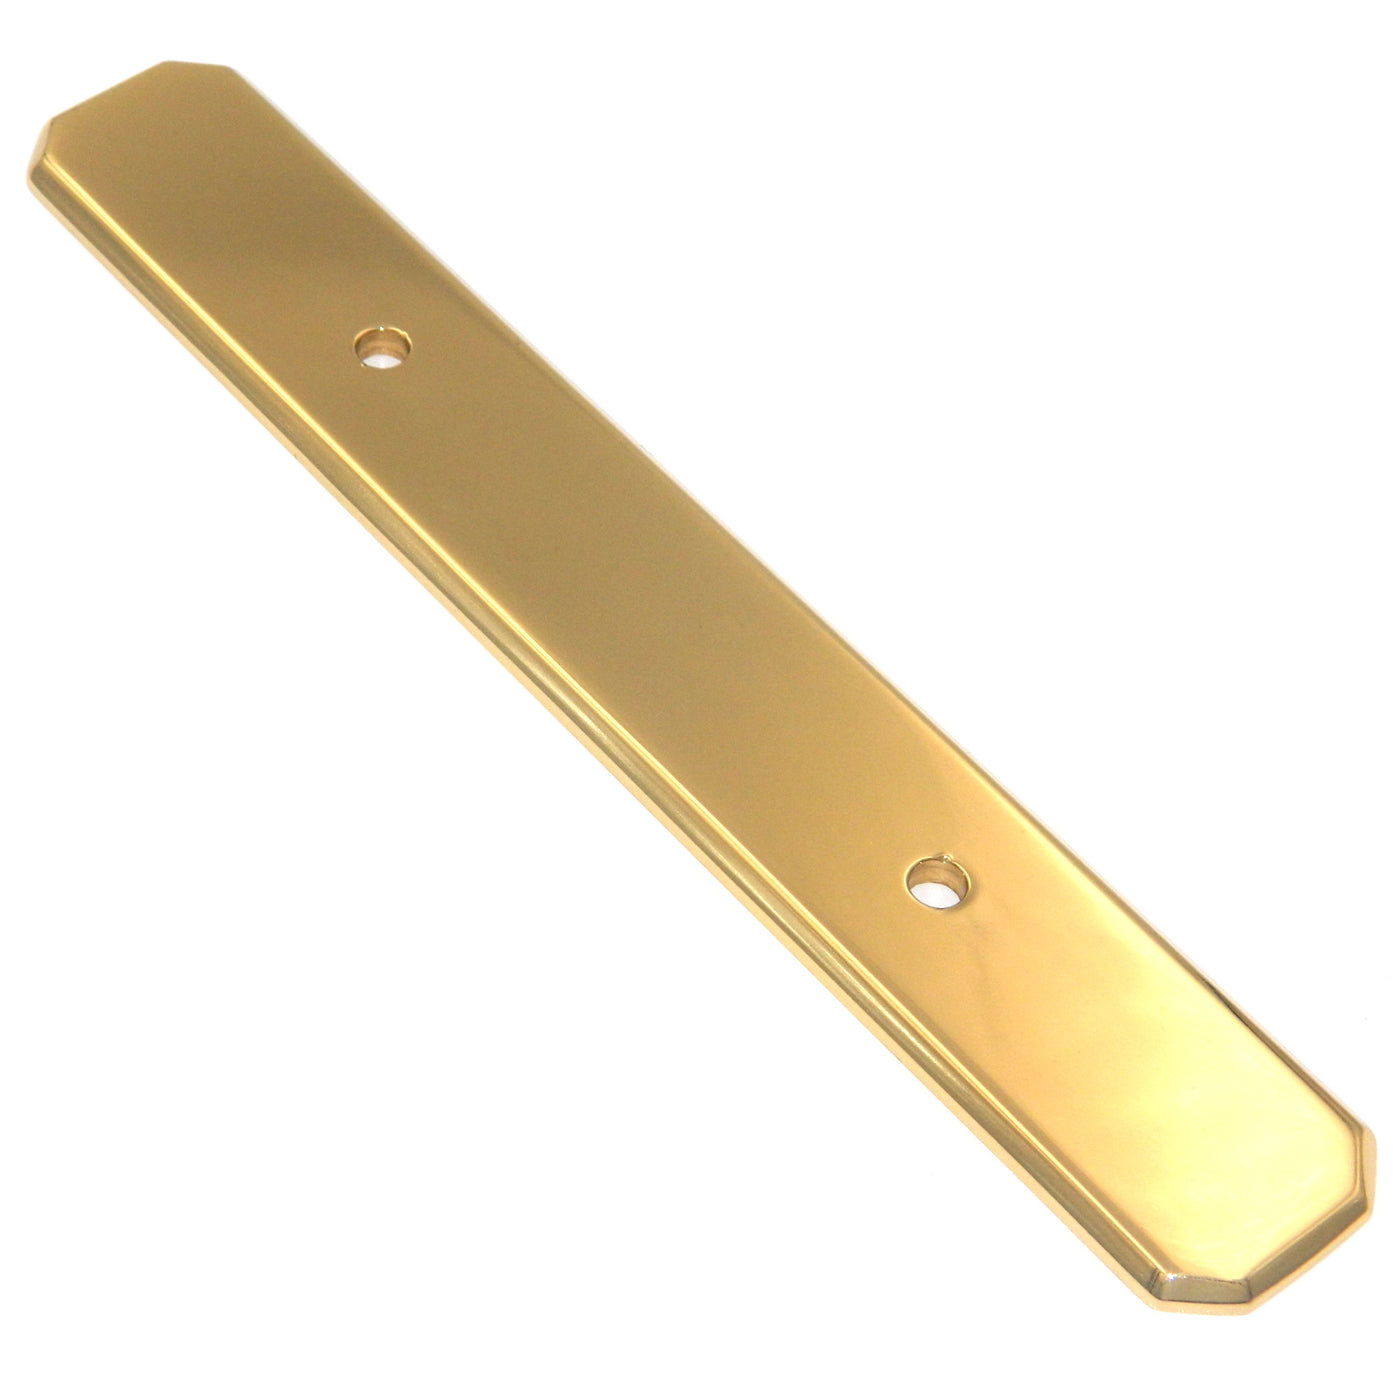 Belwith Keeler Polished Brass Solid Brass 3cc Cabinet Pull Backplate